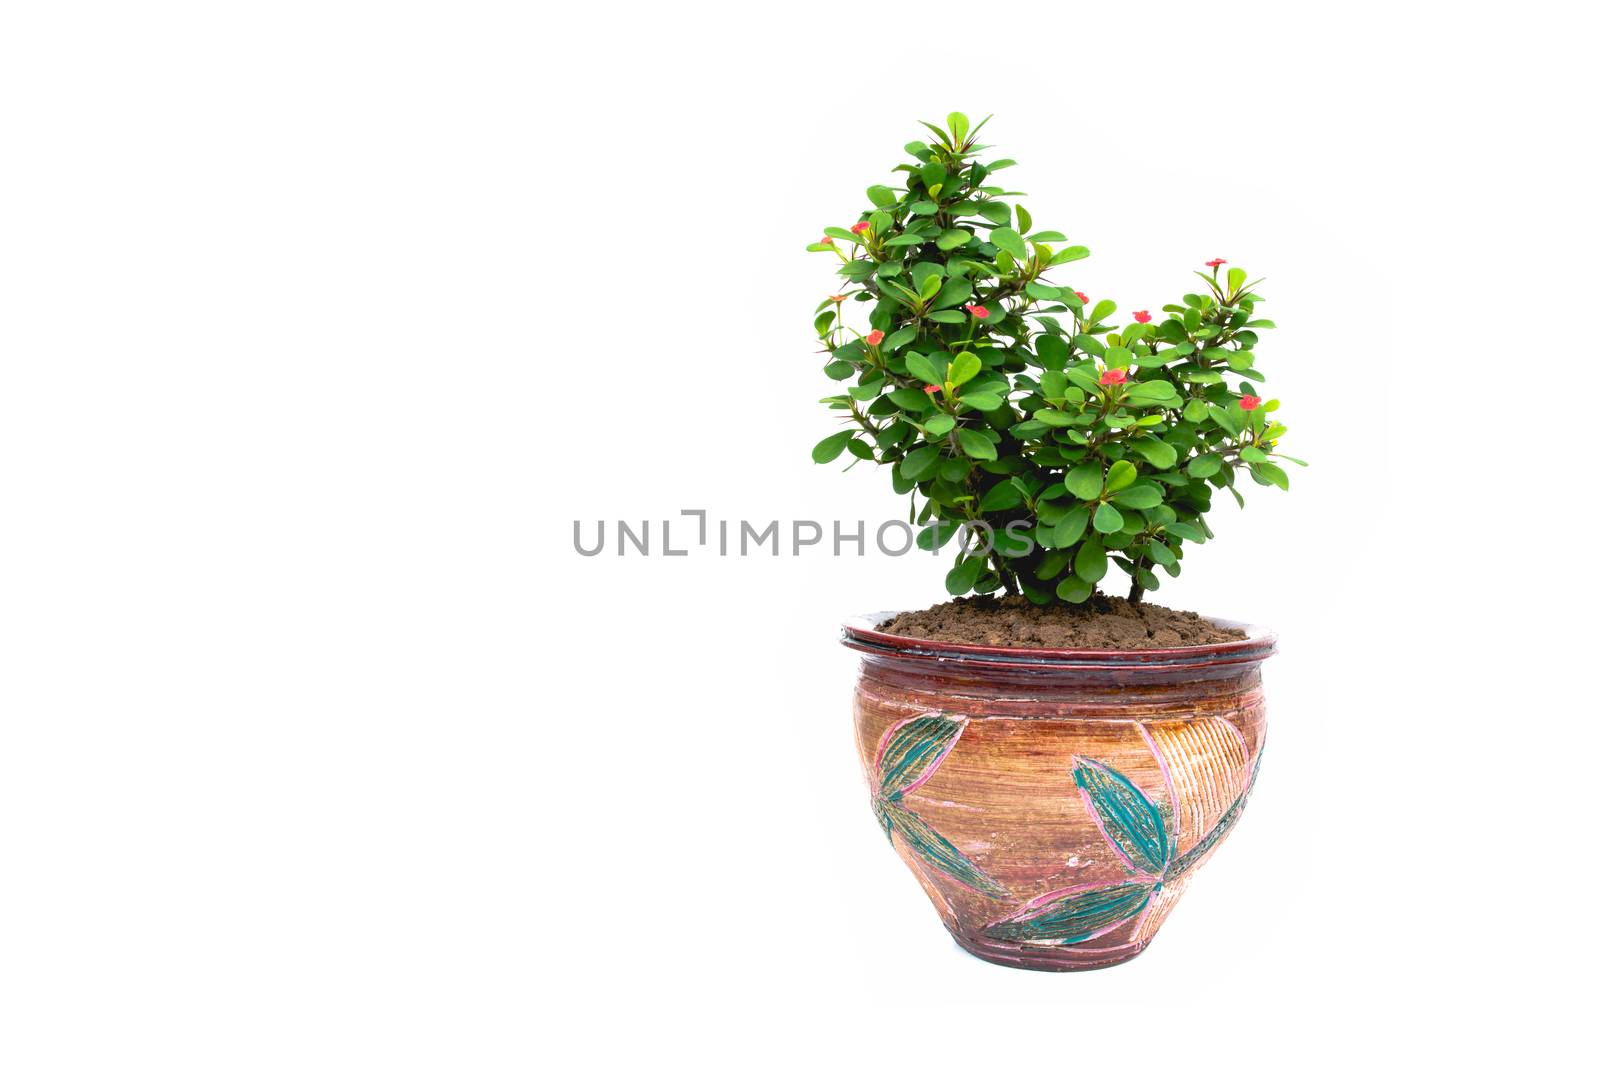 green potted plant, trees in the pot isolated on white background.